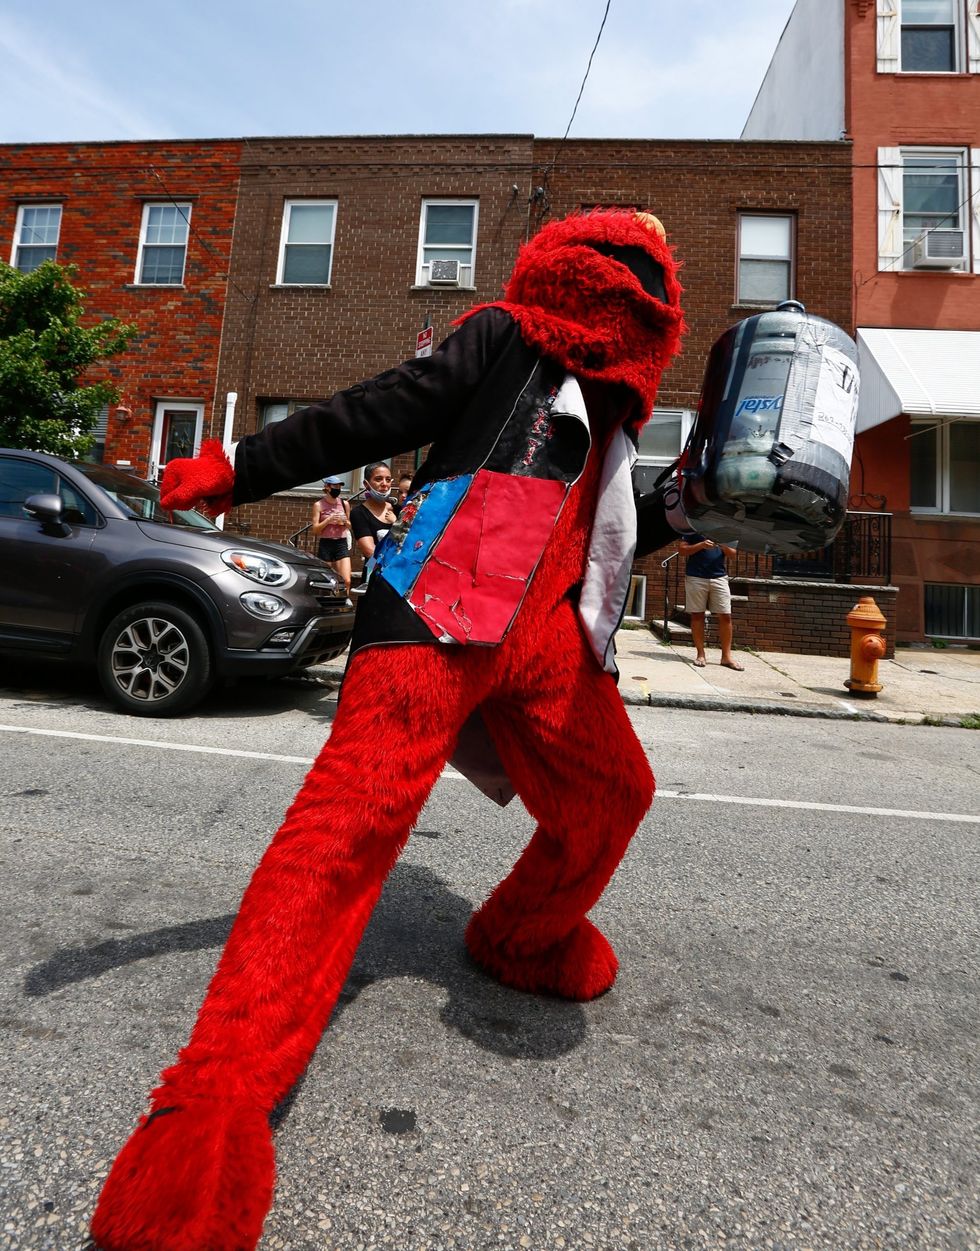 Philly Elmo performing